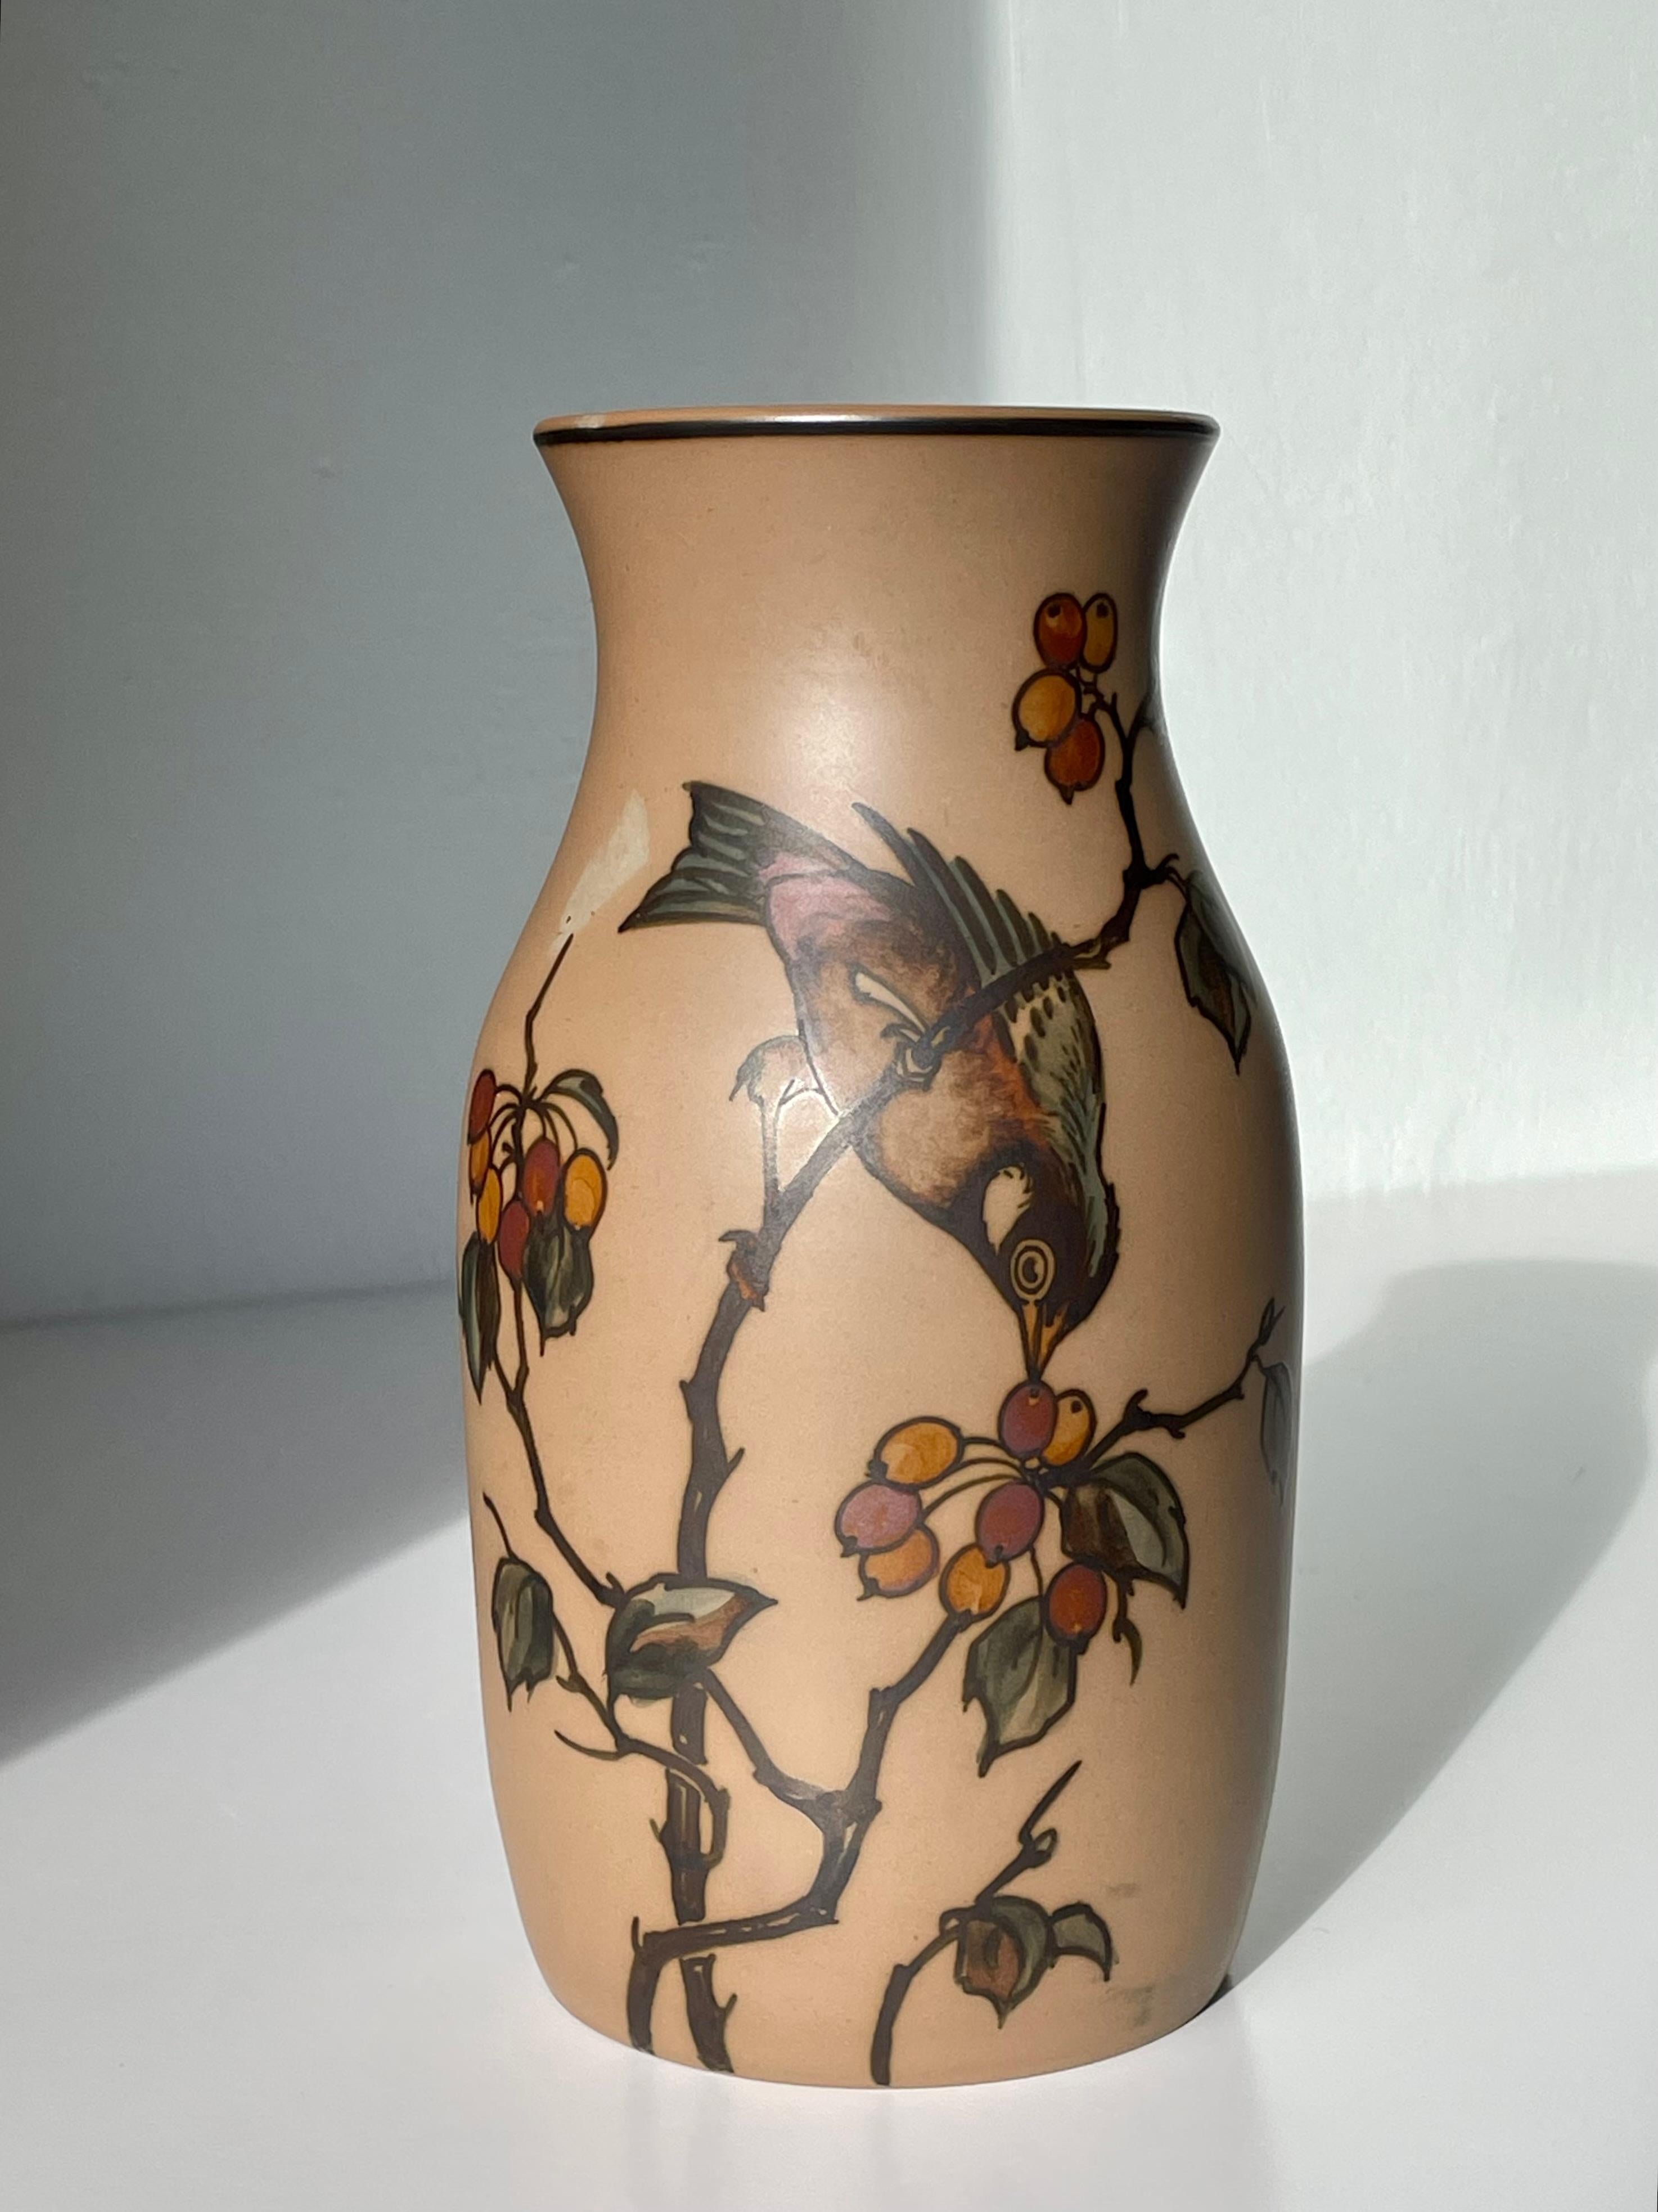 1940s Art Nouveau terracotta vase with hand-painted naturalistic organic and floral decorations with a colourful bird picking at berries on a branch. Manufactured by L. Hjorths Terracottafabrik in the small town of Rønne on the Danish island of